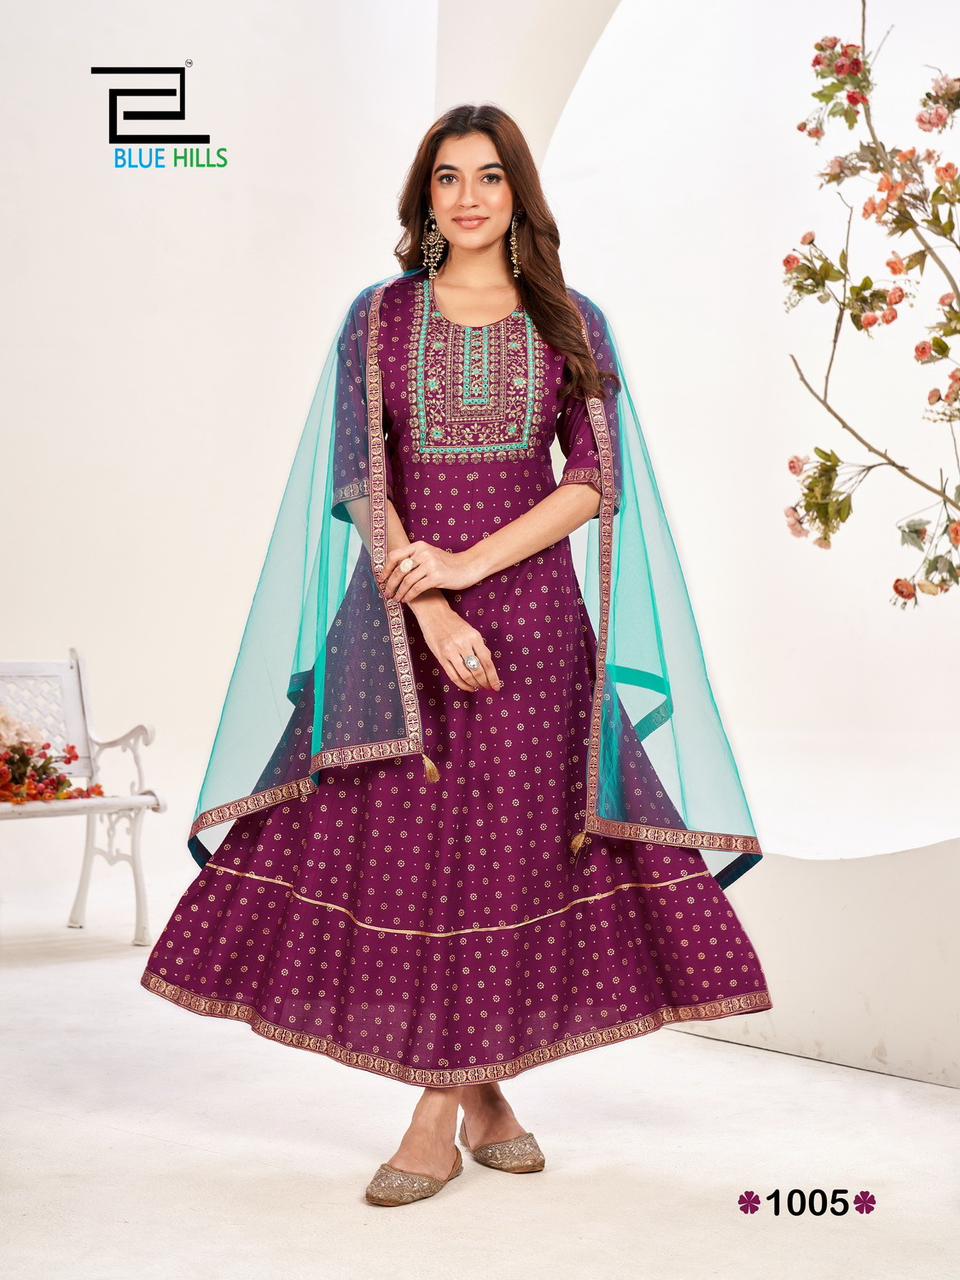 Blue Hills Manika Mage Hithe Vol 20 collection 1